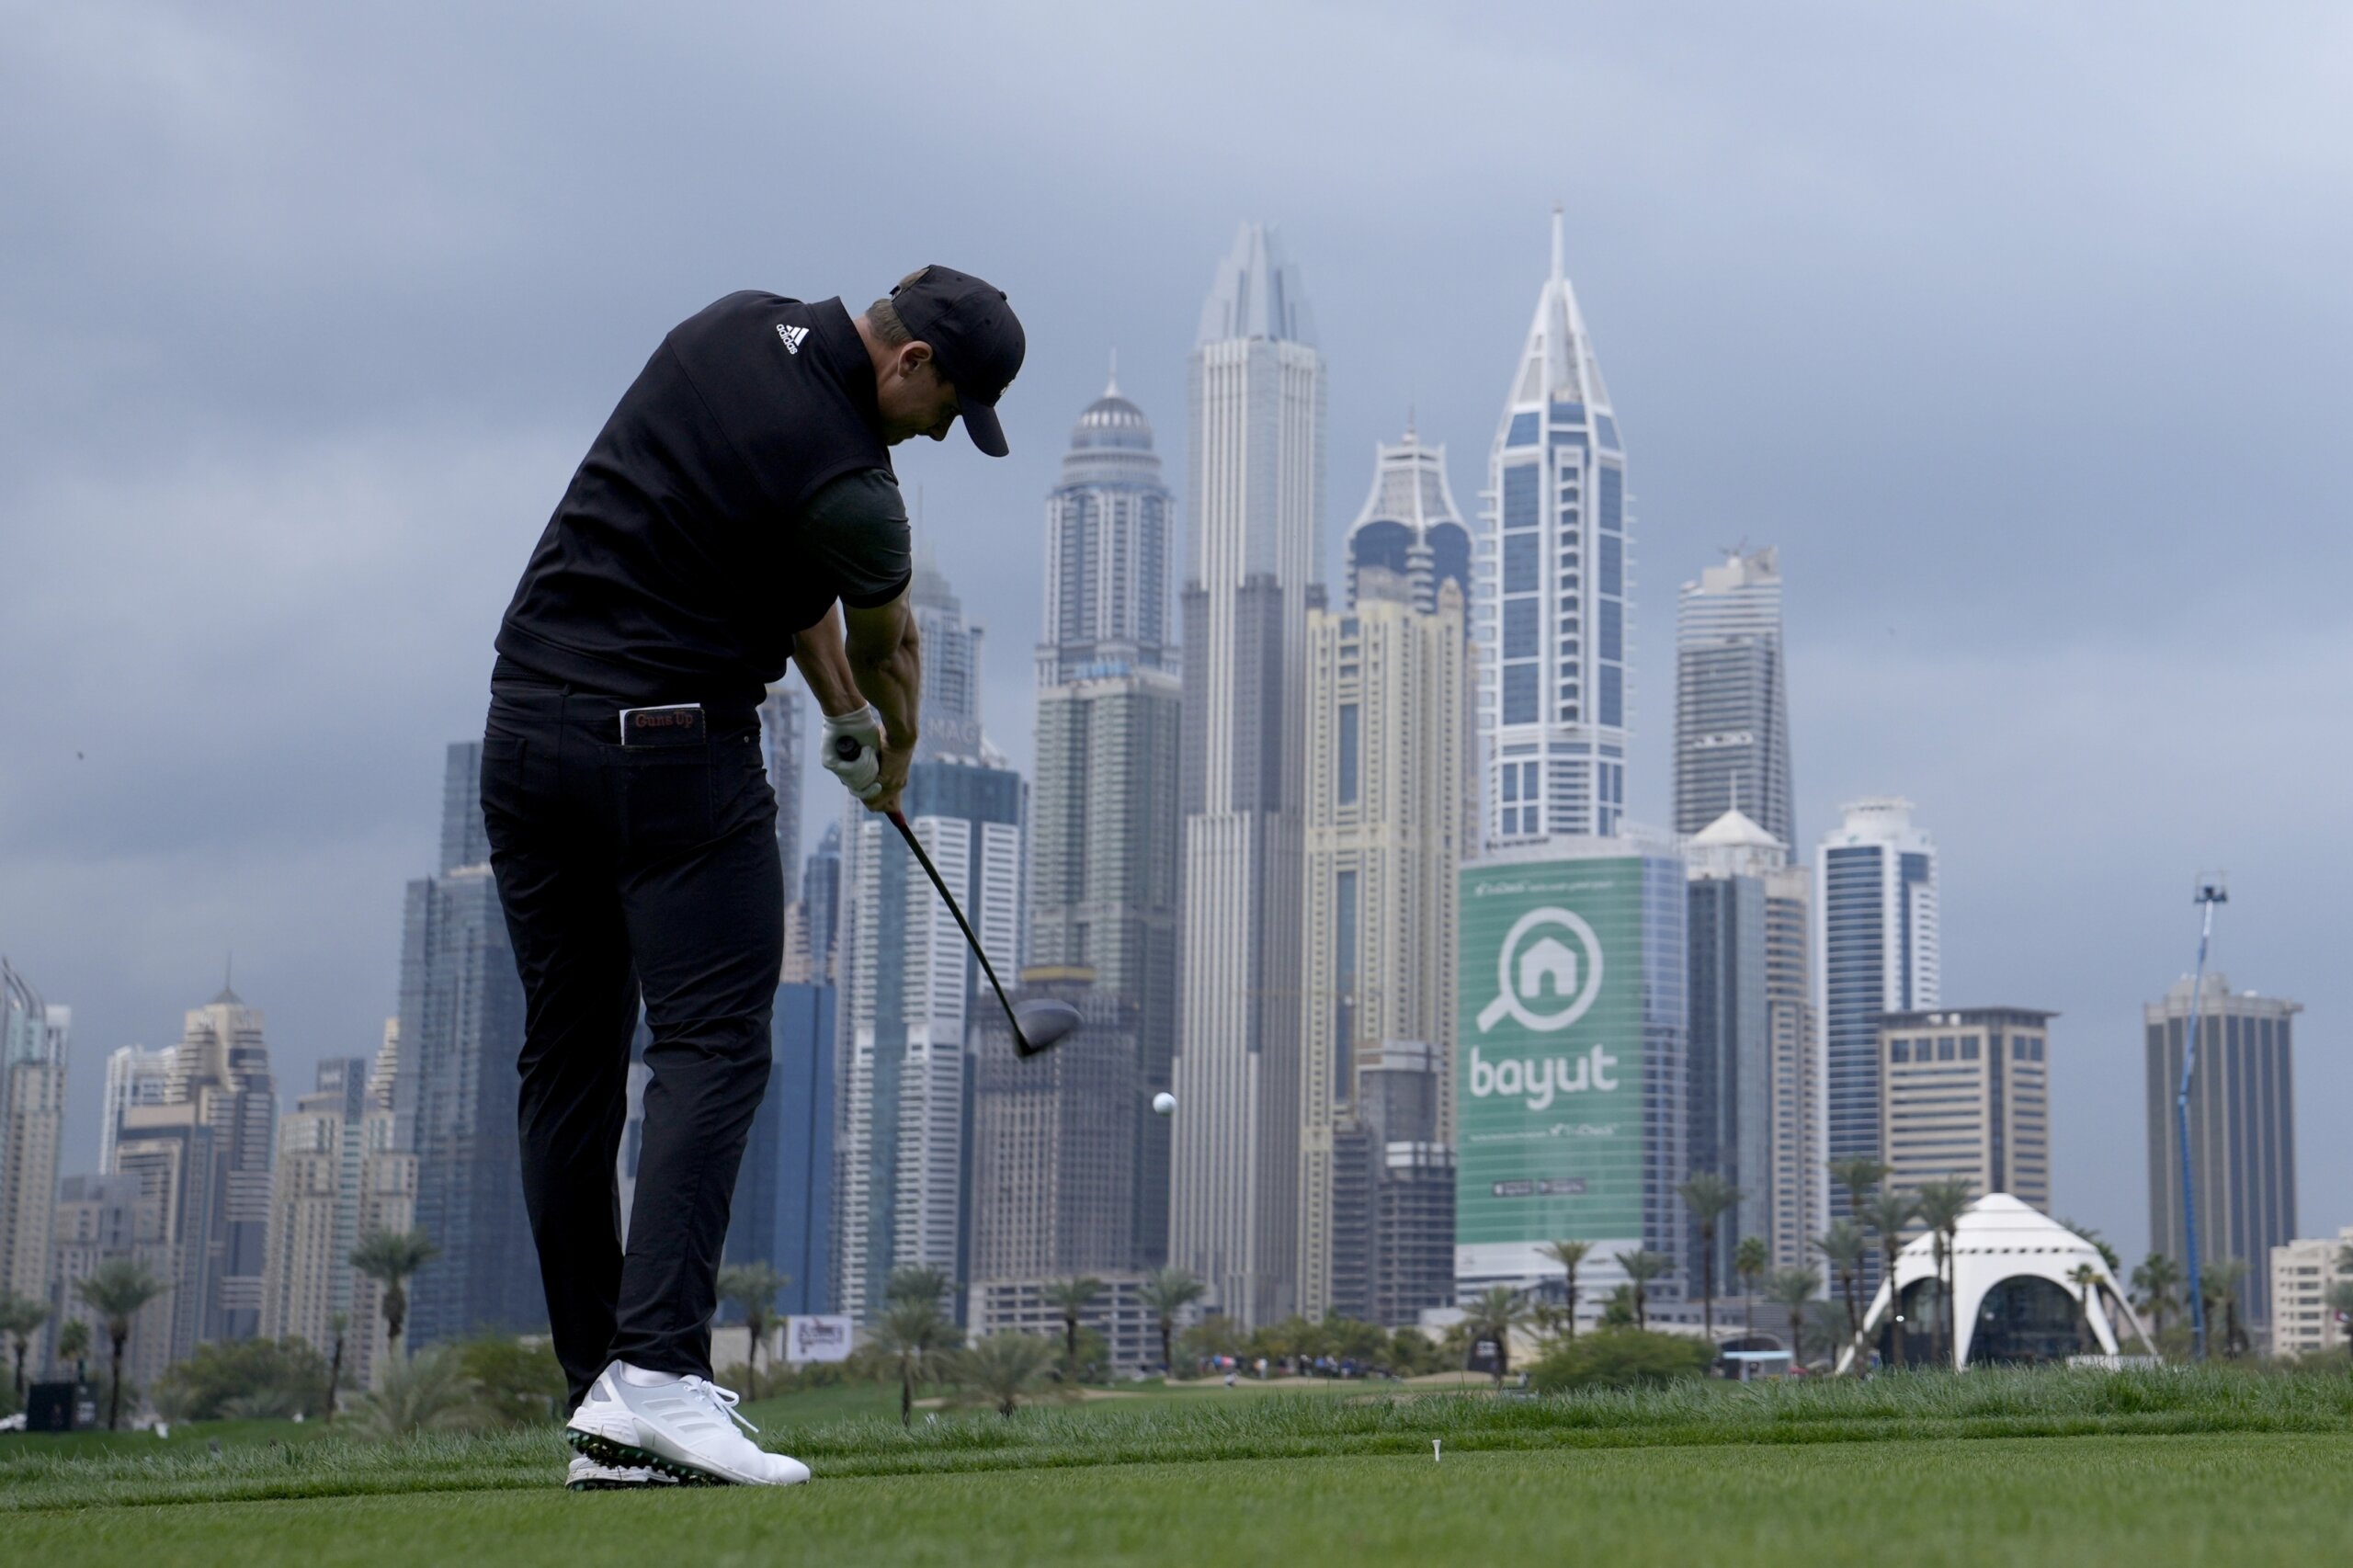 McIlroy and Reed both 6-under after 1st round in Dubai